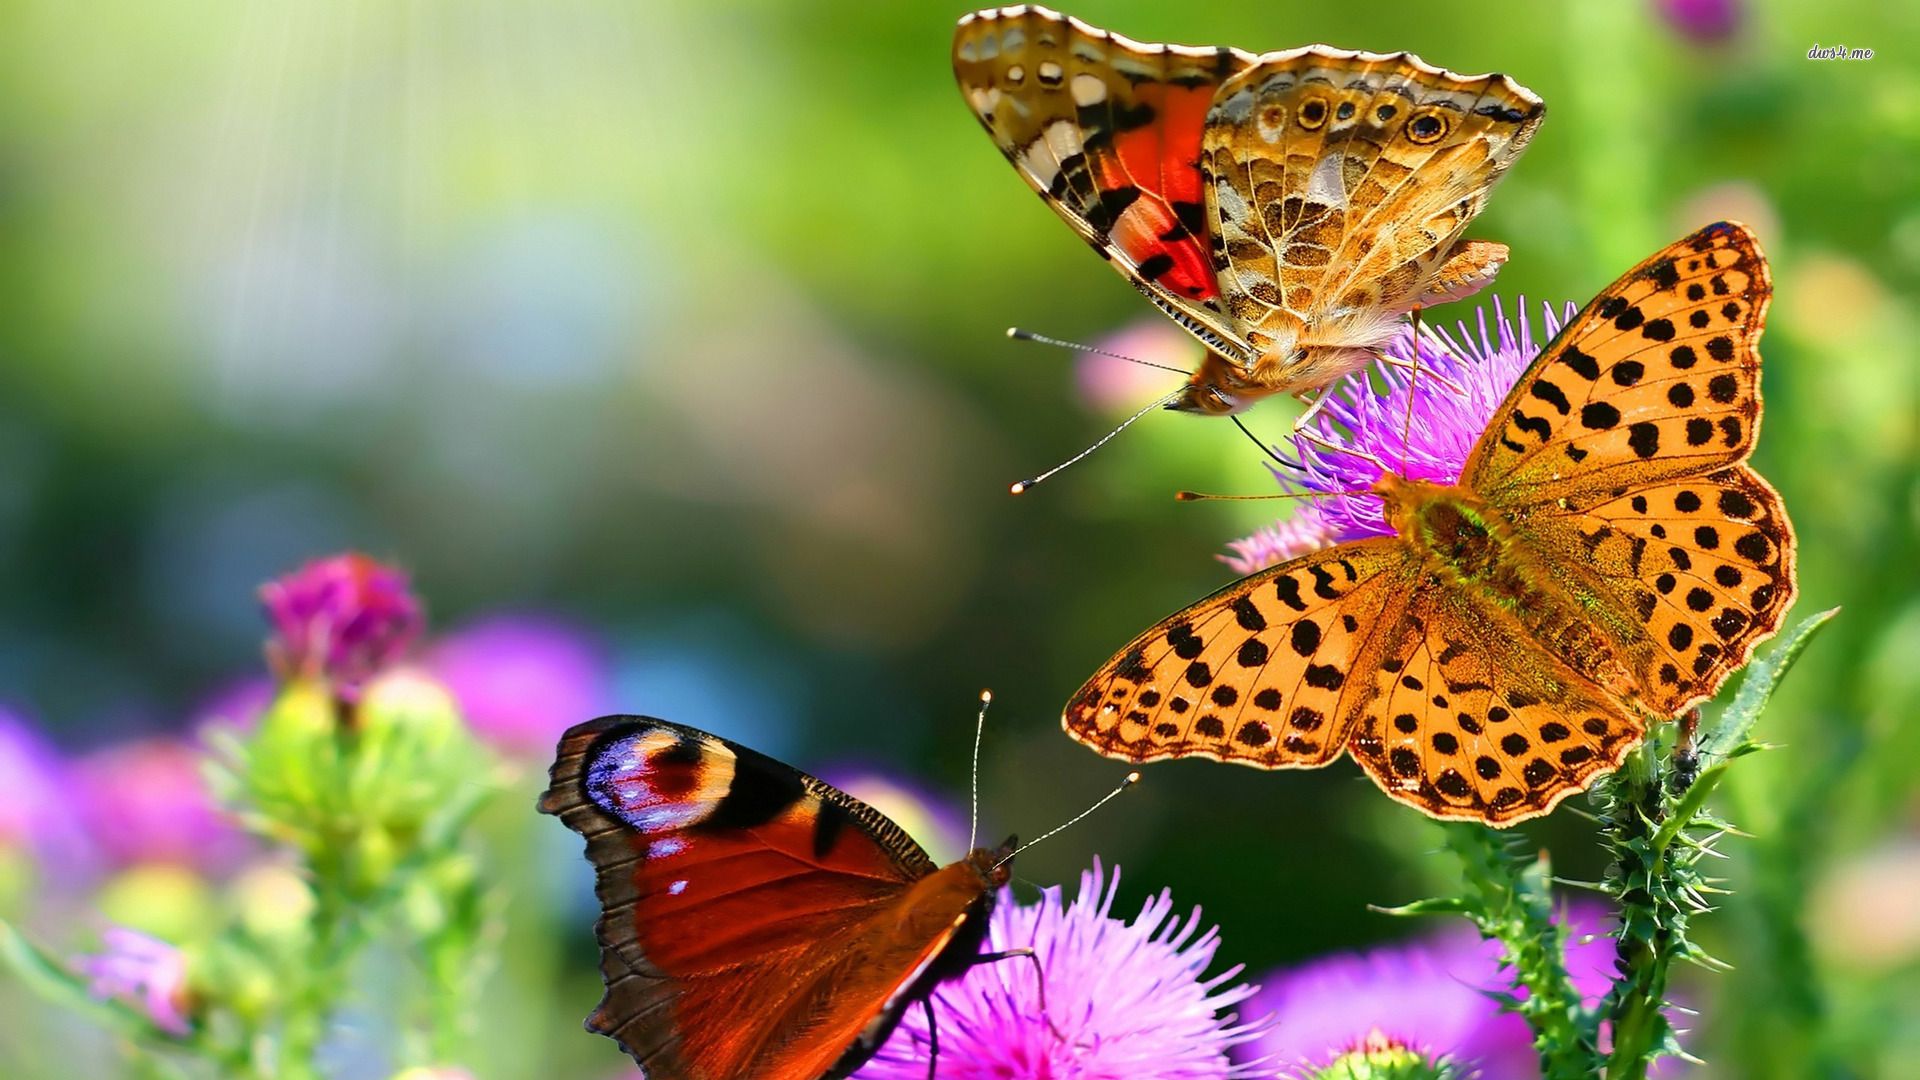 The Best Butterflies Live Wallpaper On Android HD Wallpaper Free Download Wallpaper & Background Download